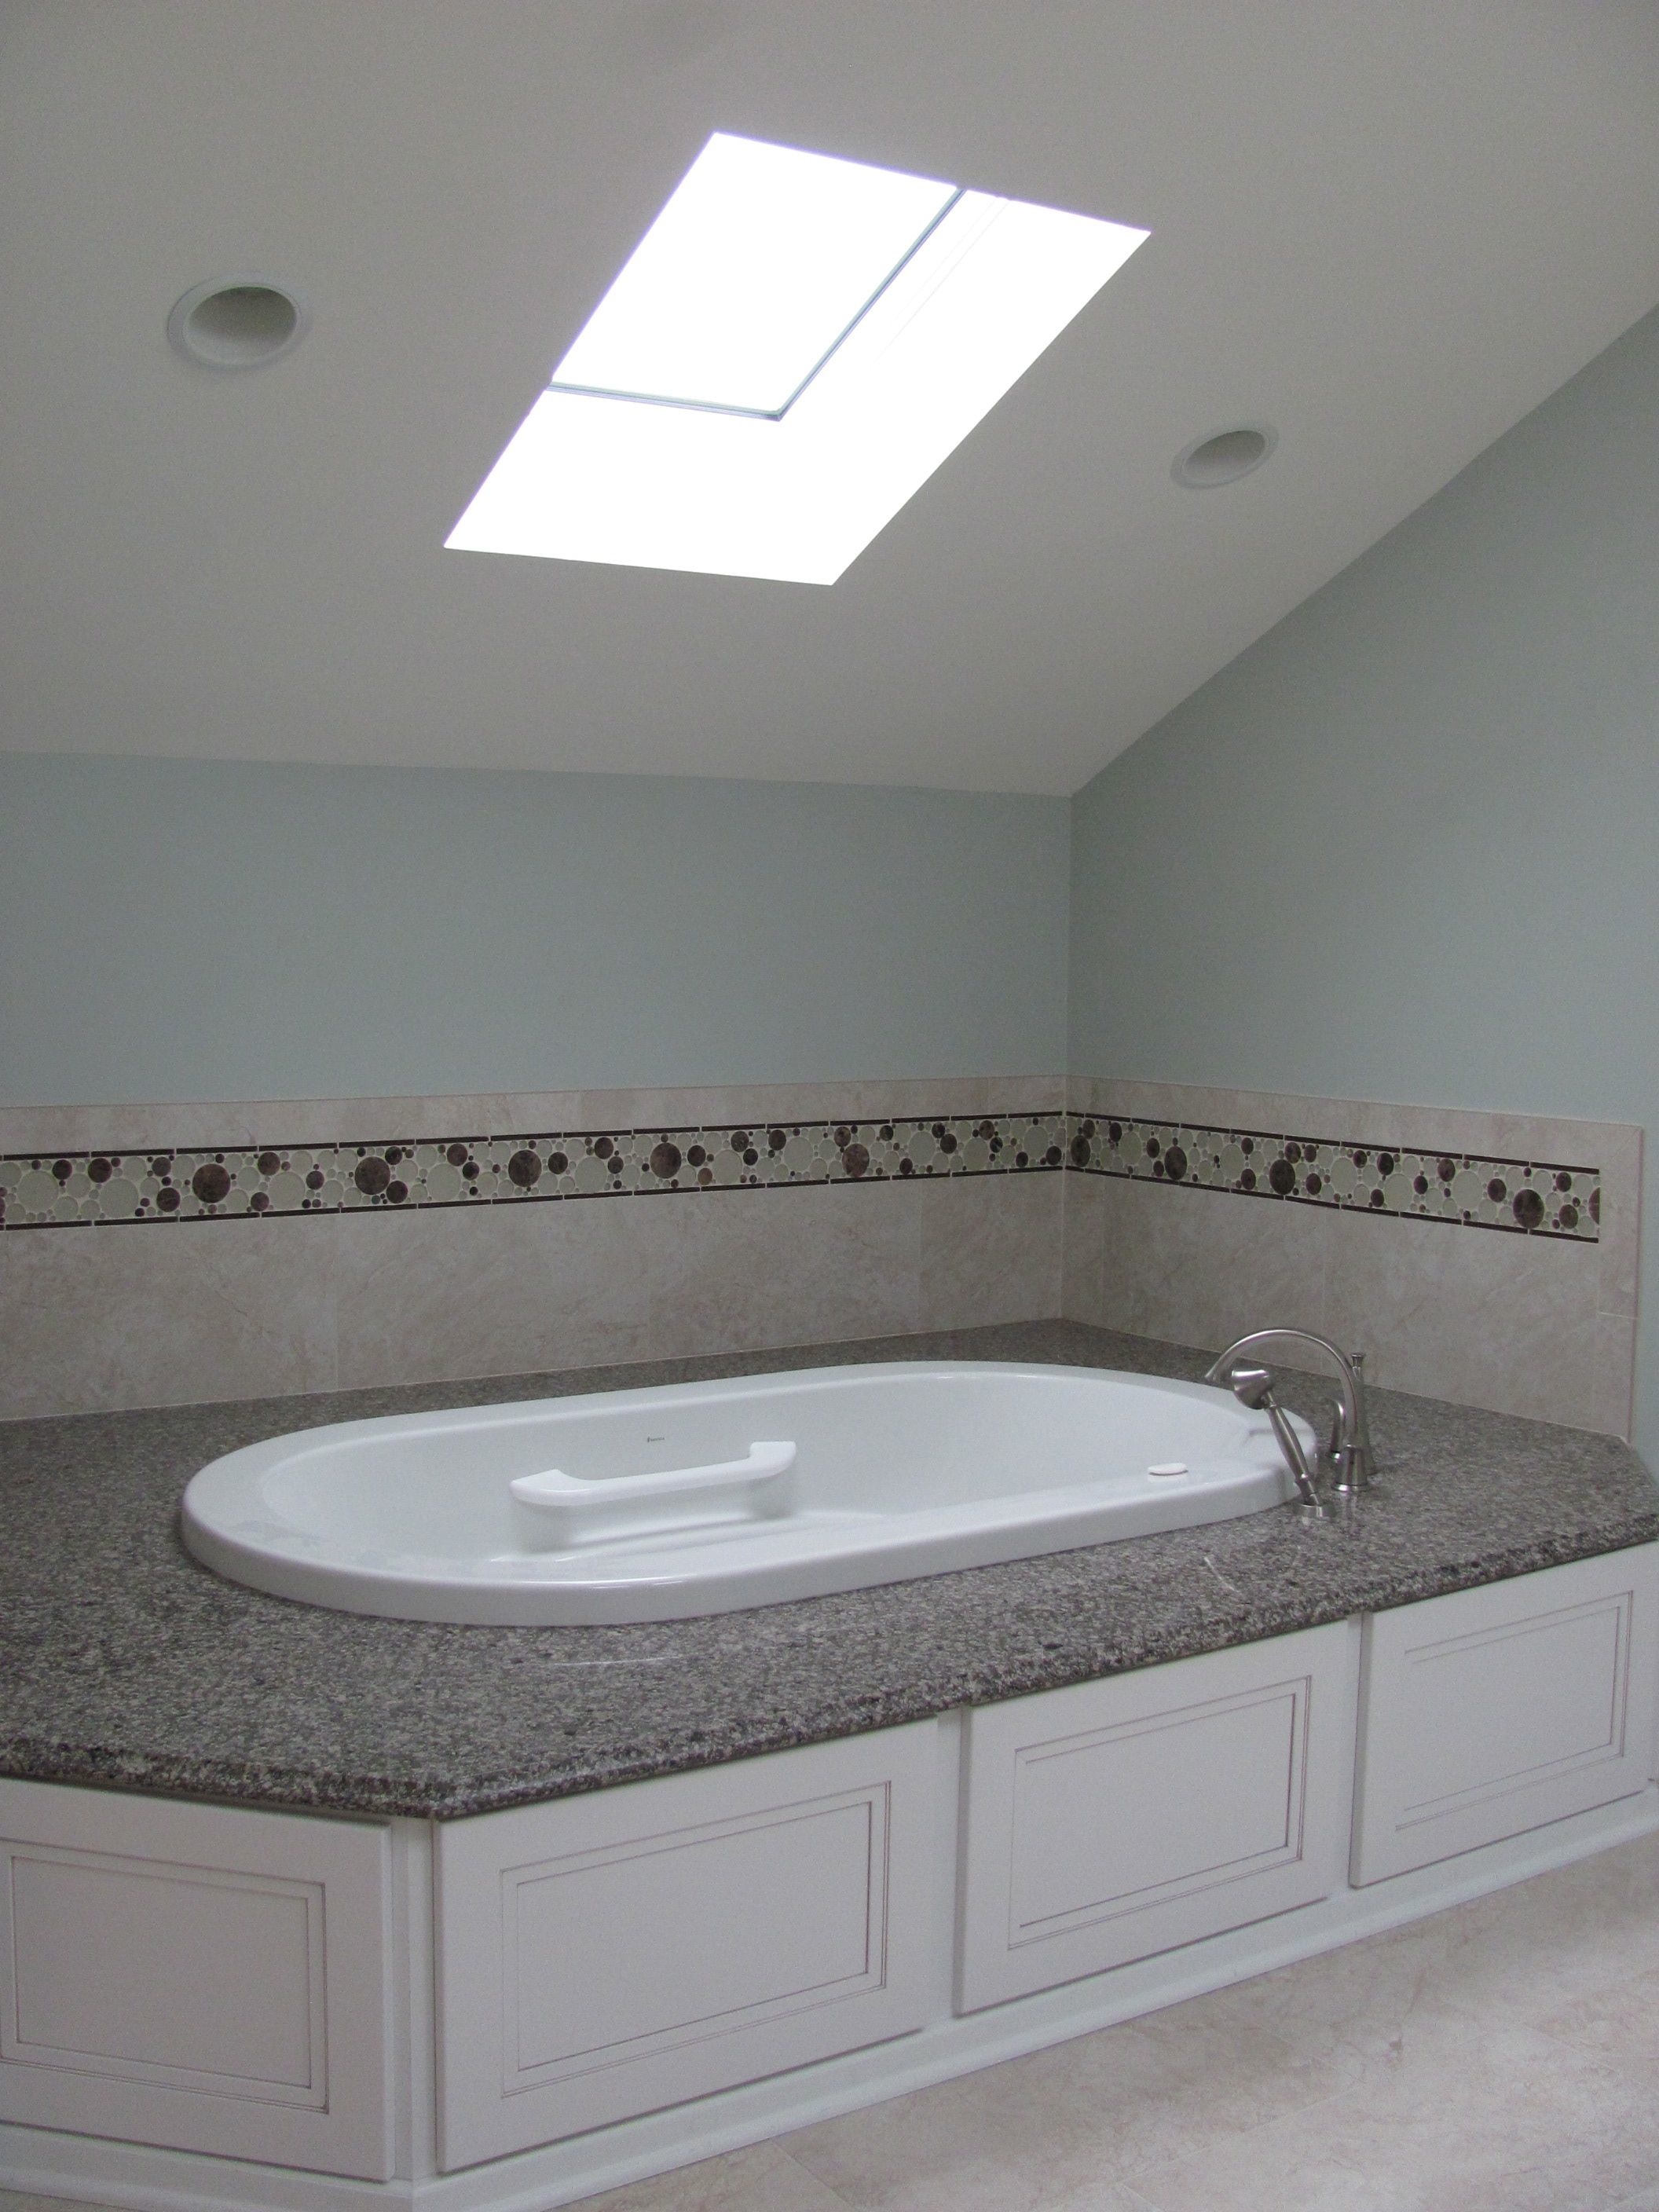 Soaking tub with easy access. Perfect for Bubbles!